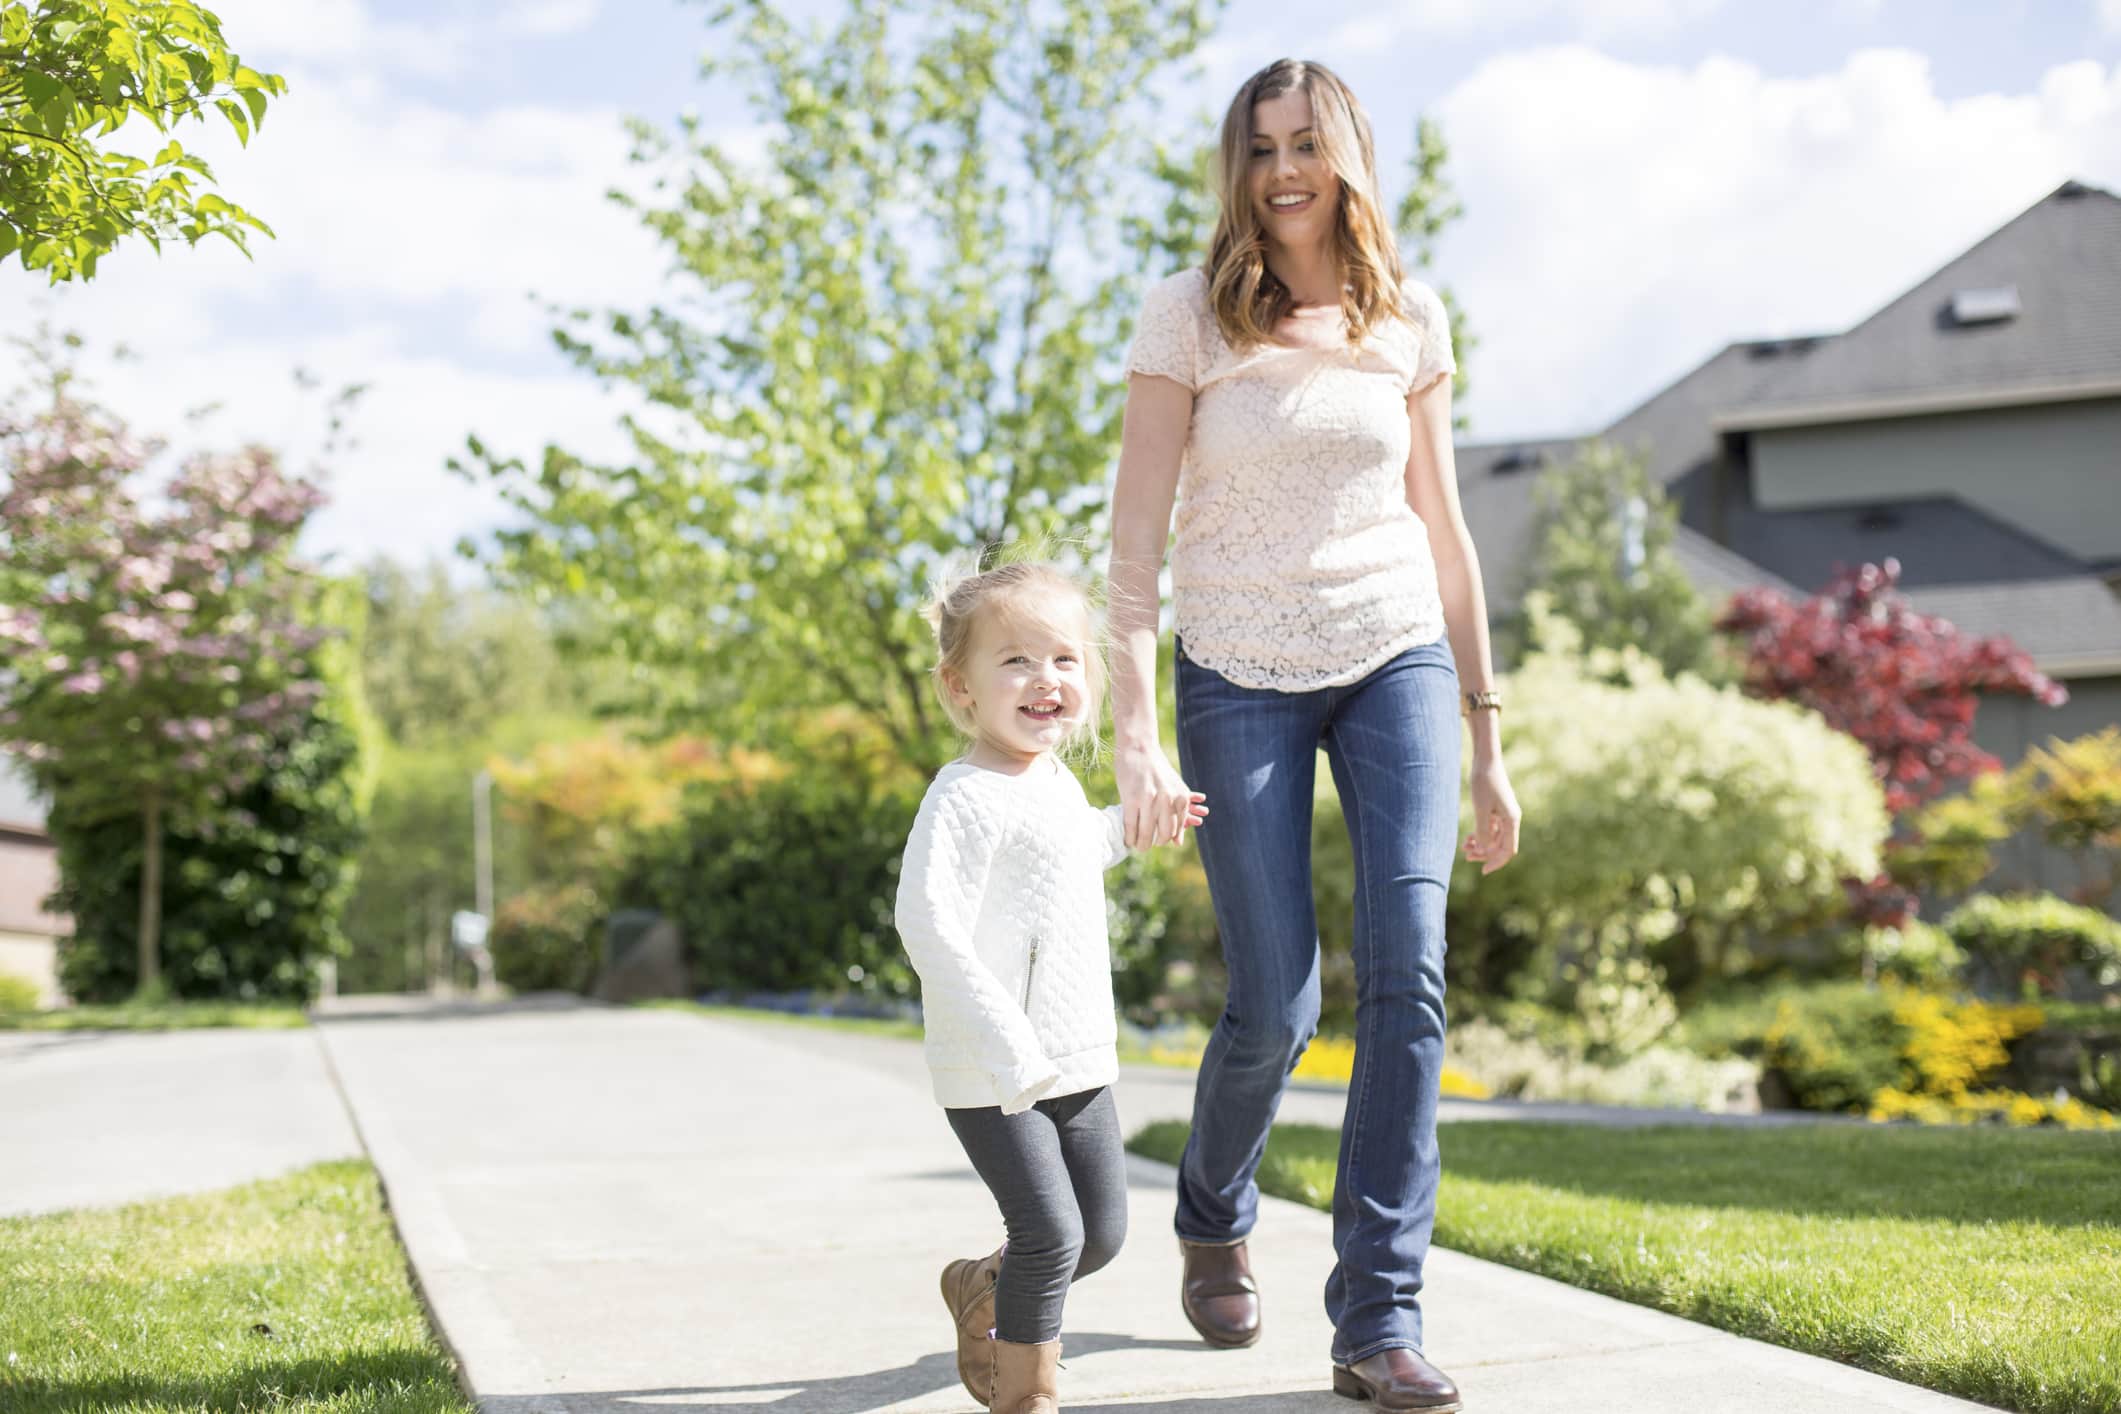 15 Signs You’re a Suburban Mom